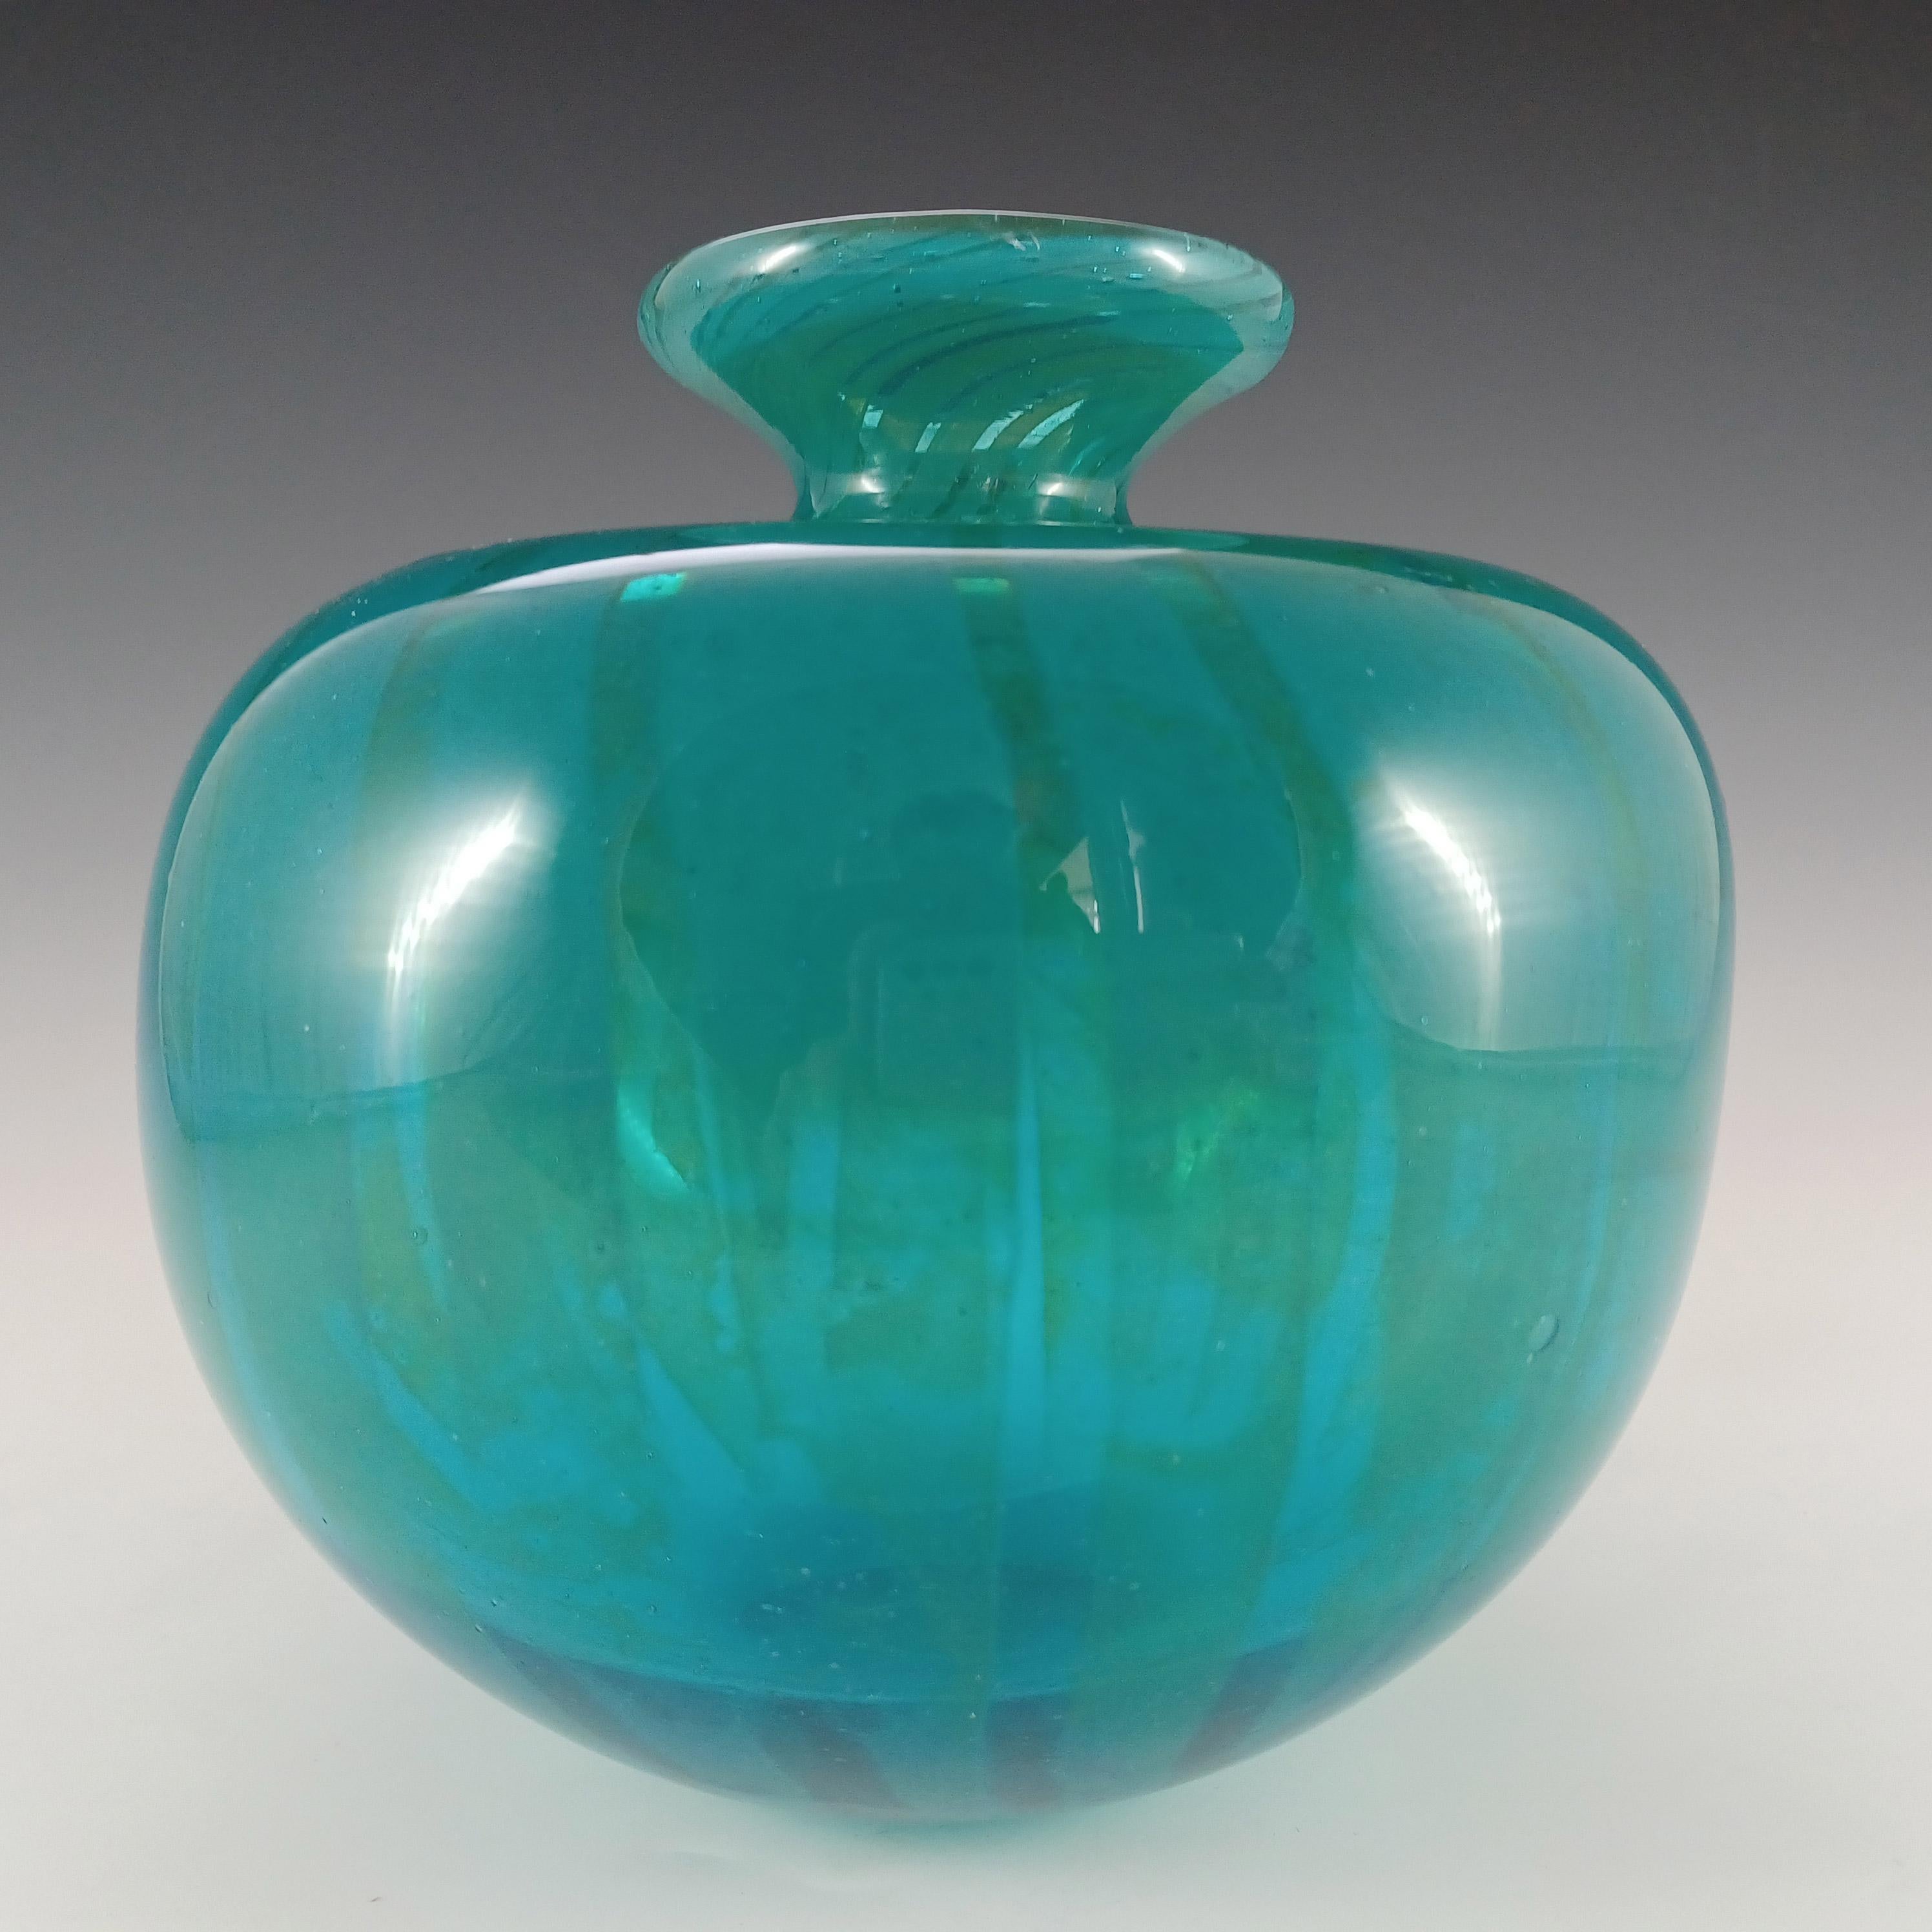 A wonderful large and heavy (1.4kg unpacked) green Maltese glass 'globe' vase in a striped variation of the Ming pattern. Made at Mdina Glass by Eric Dobson, fully signed with artist signature and dated 1975 to the base. Although the vase looks